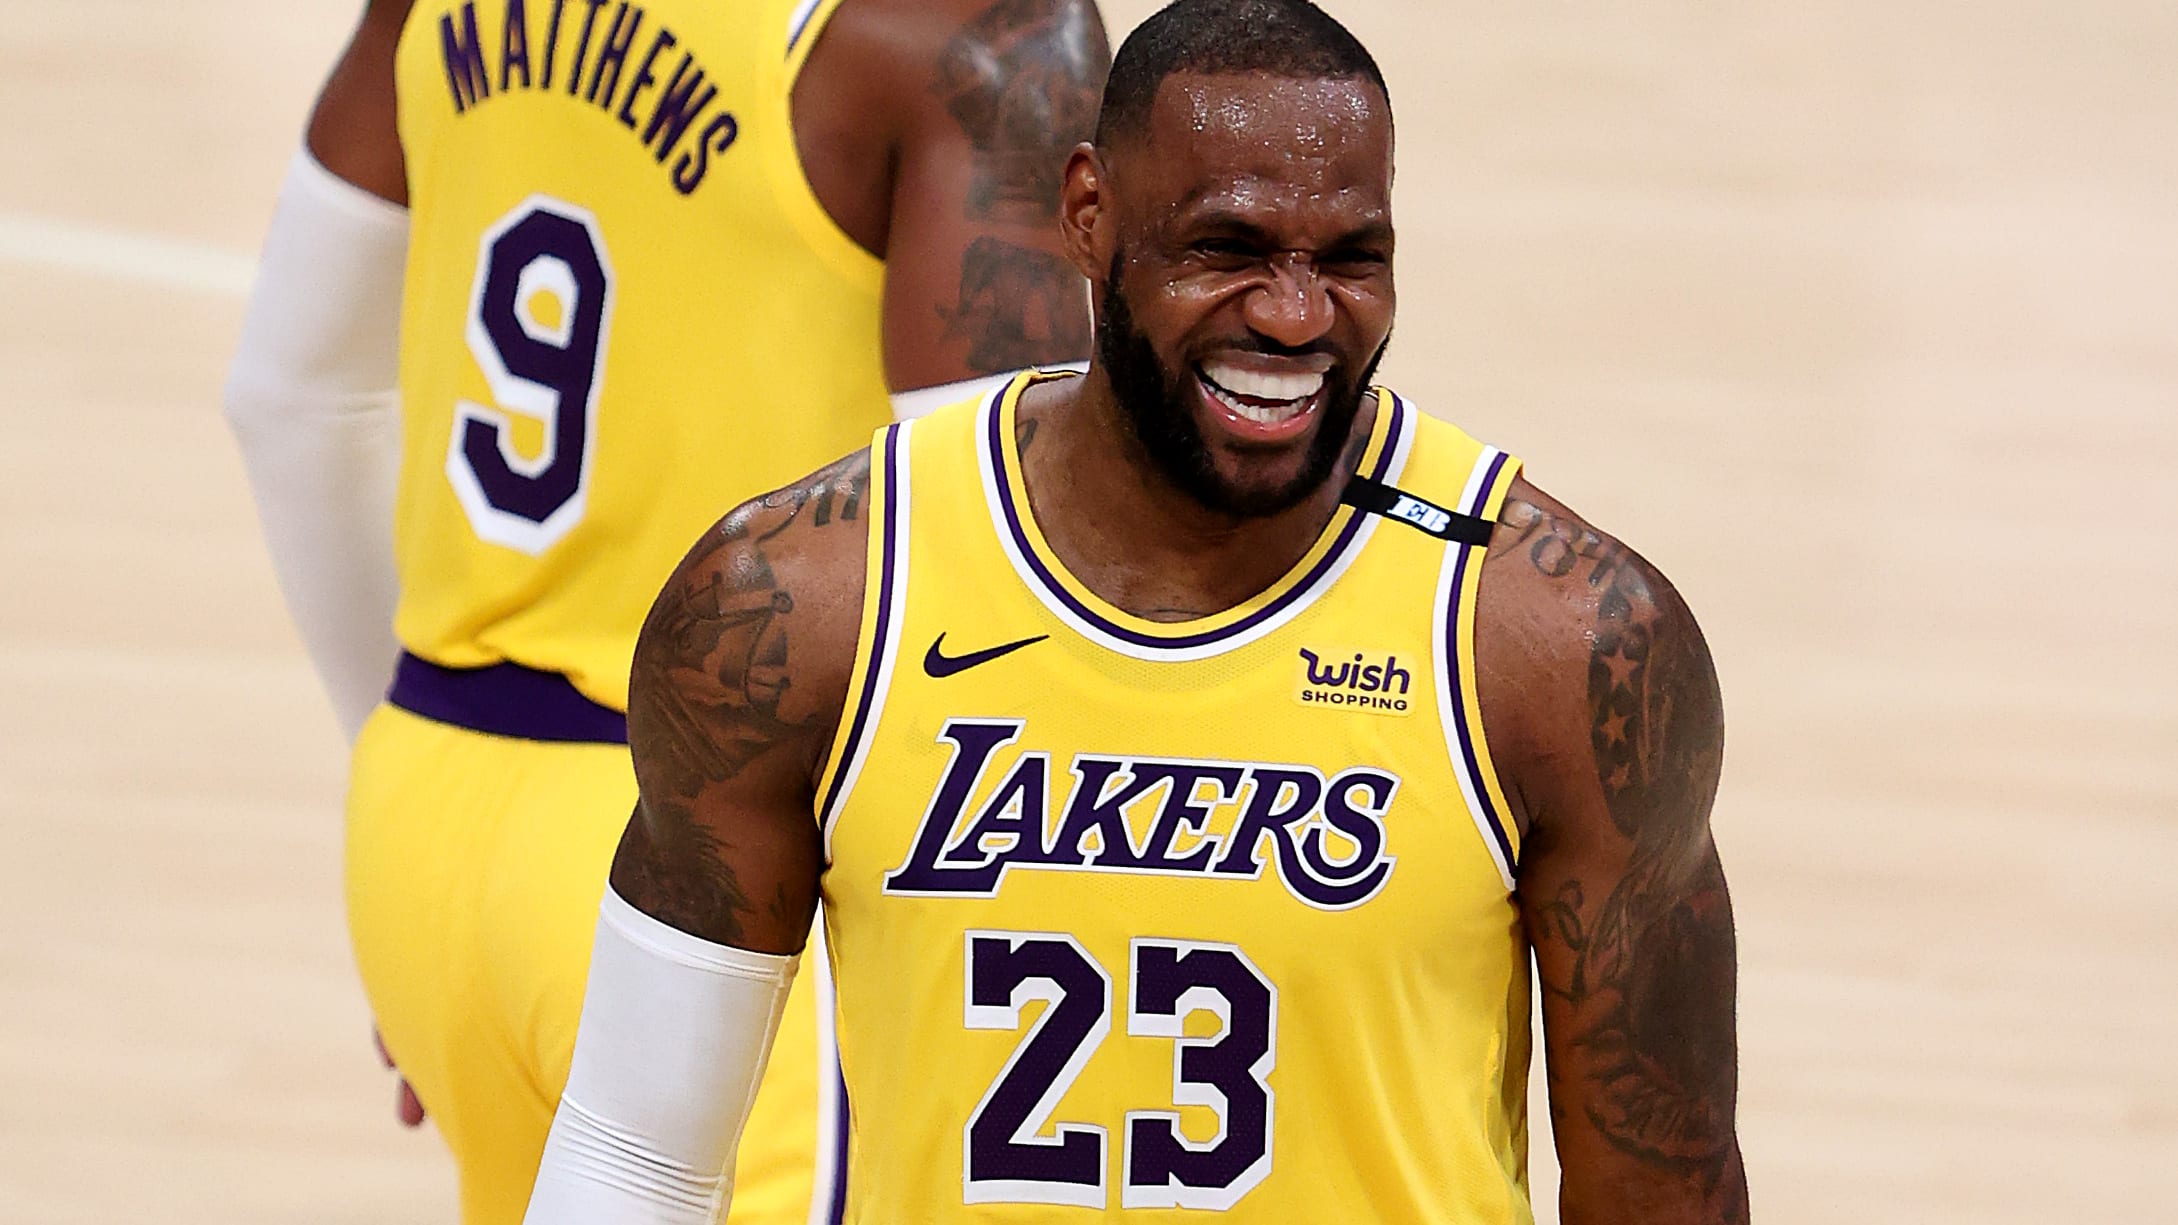 LeBron James officially changes jersey number to No. 6